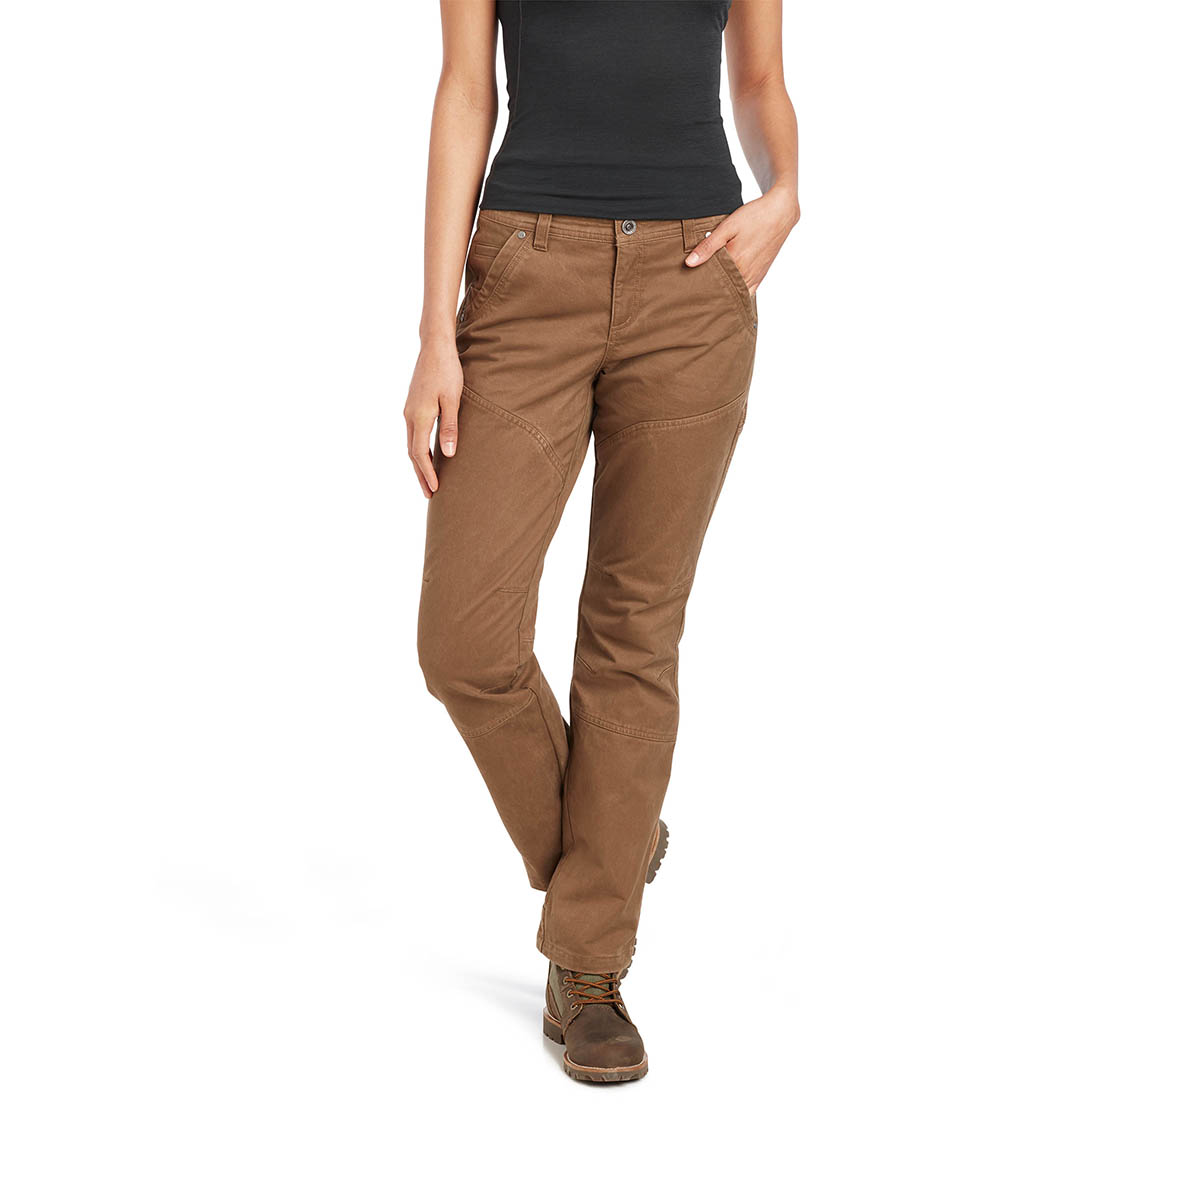 Kuhl Women's Rydr Pant